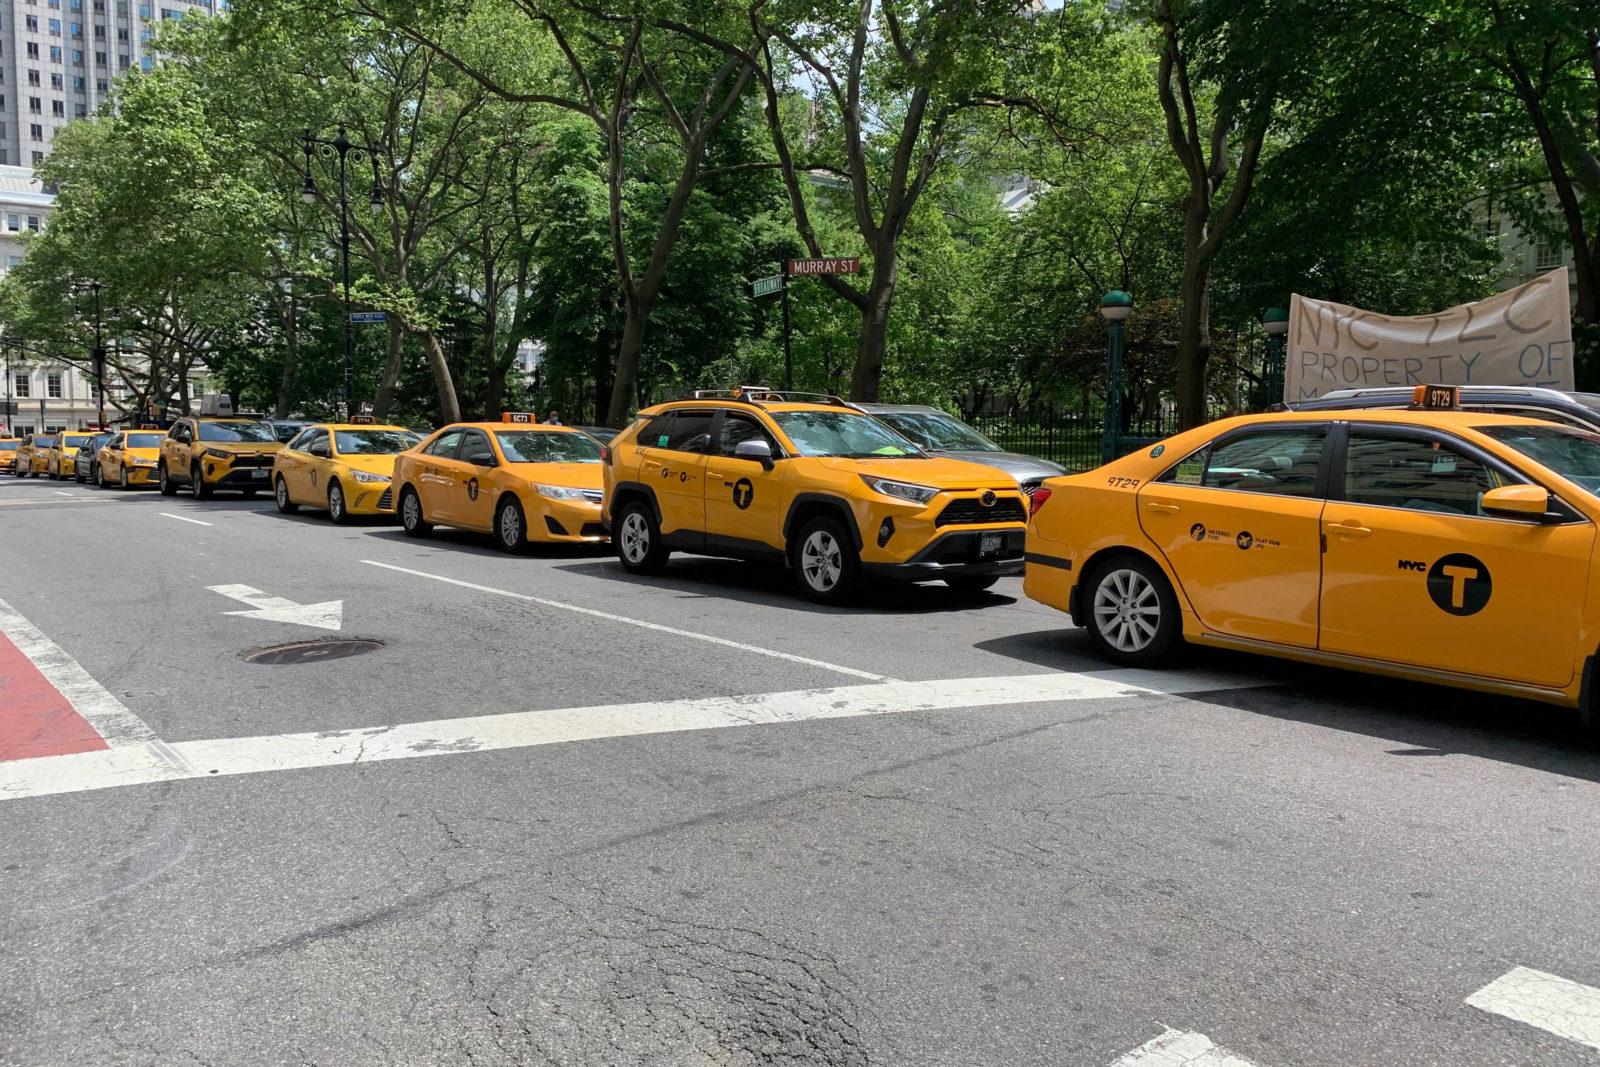 A photo of a row of yellow taxi cabs parked on a city street